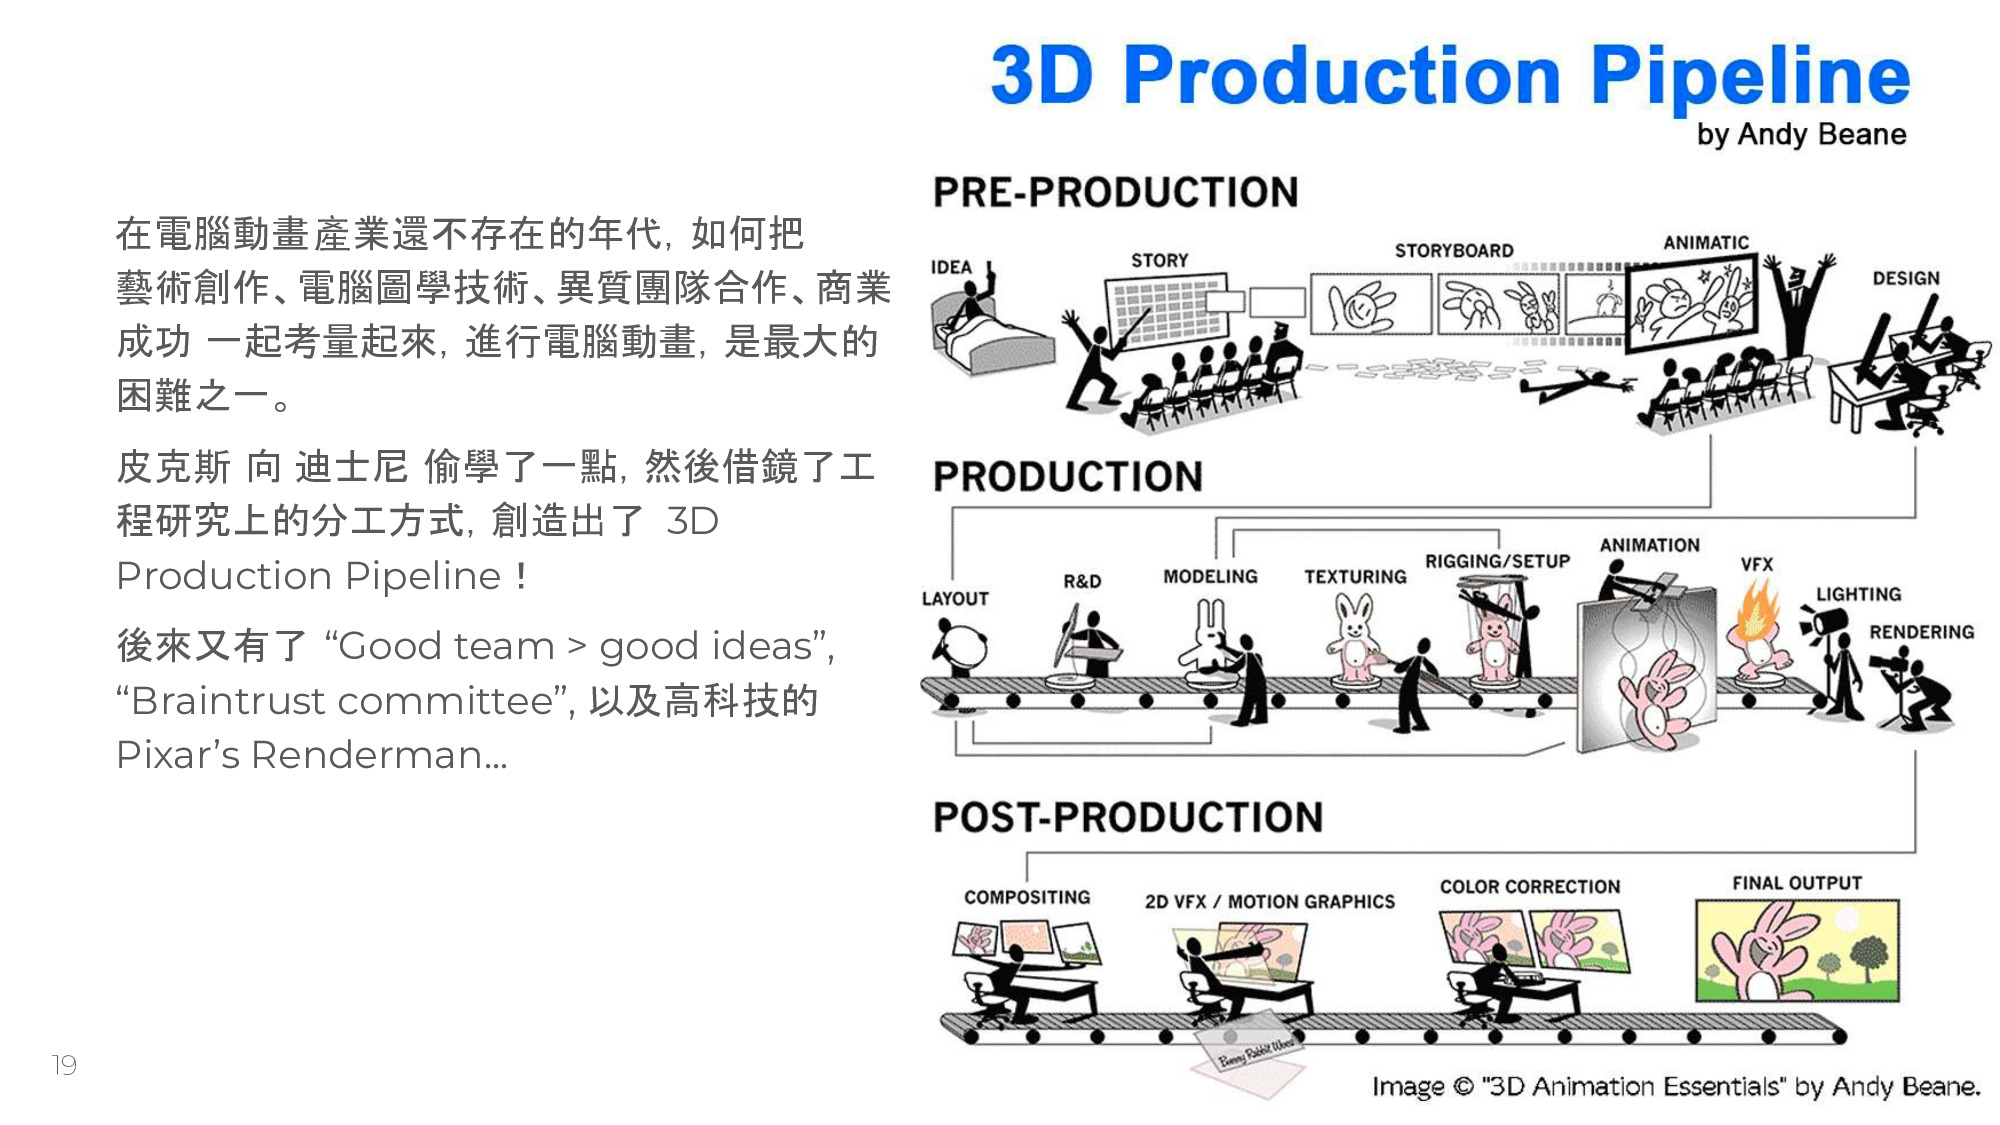 3D Animation Production Pipeline by Andy Beane